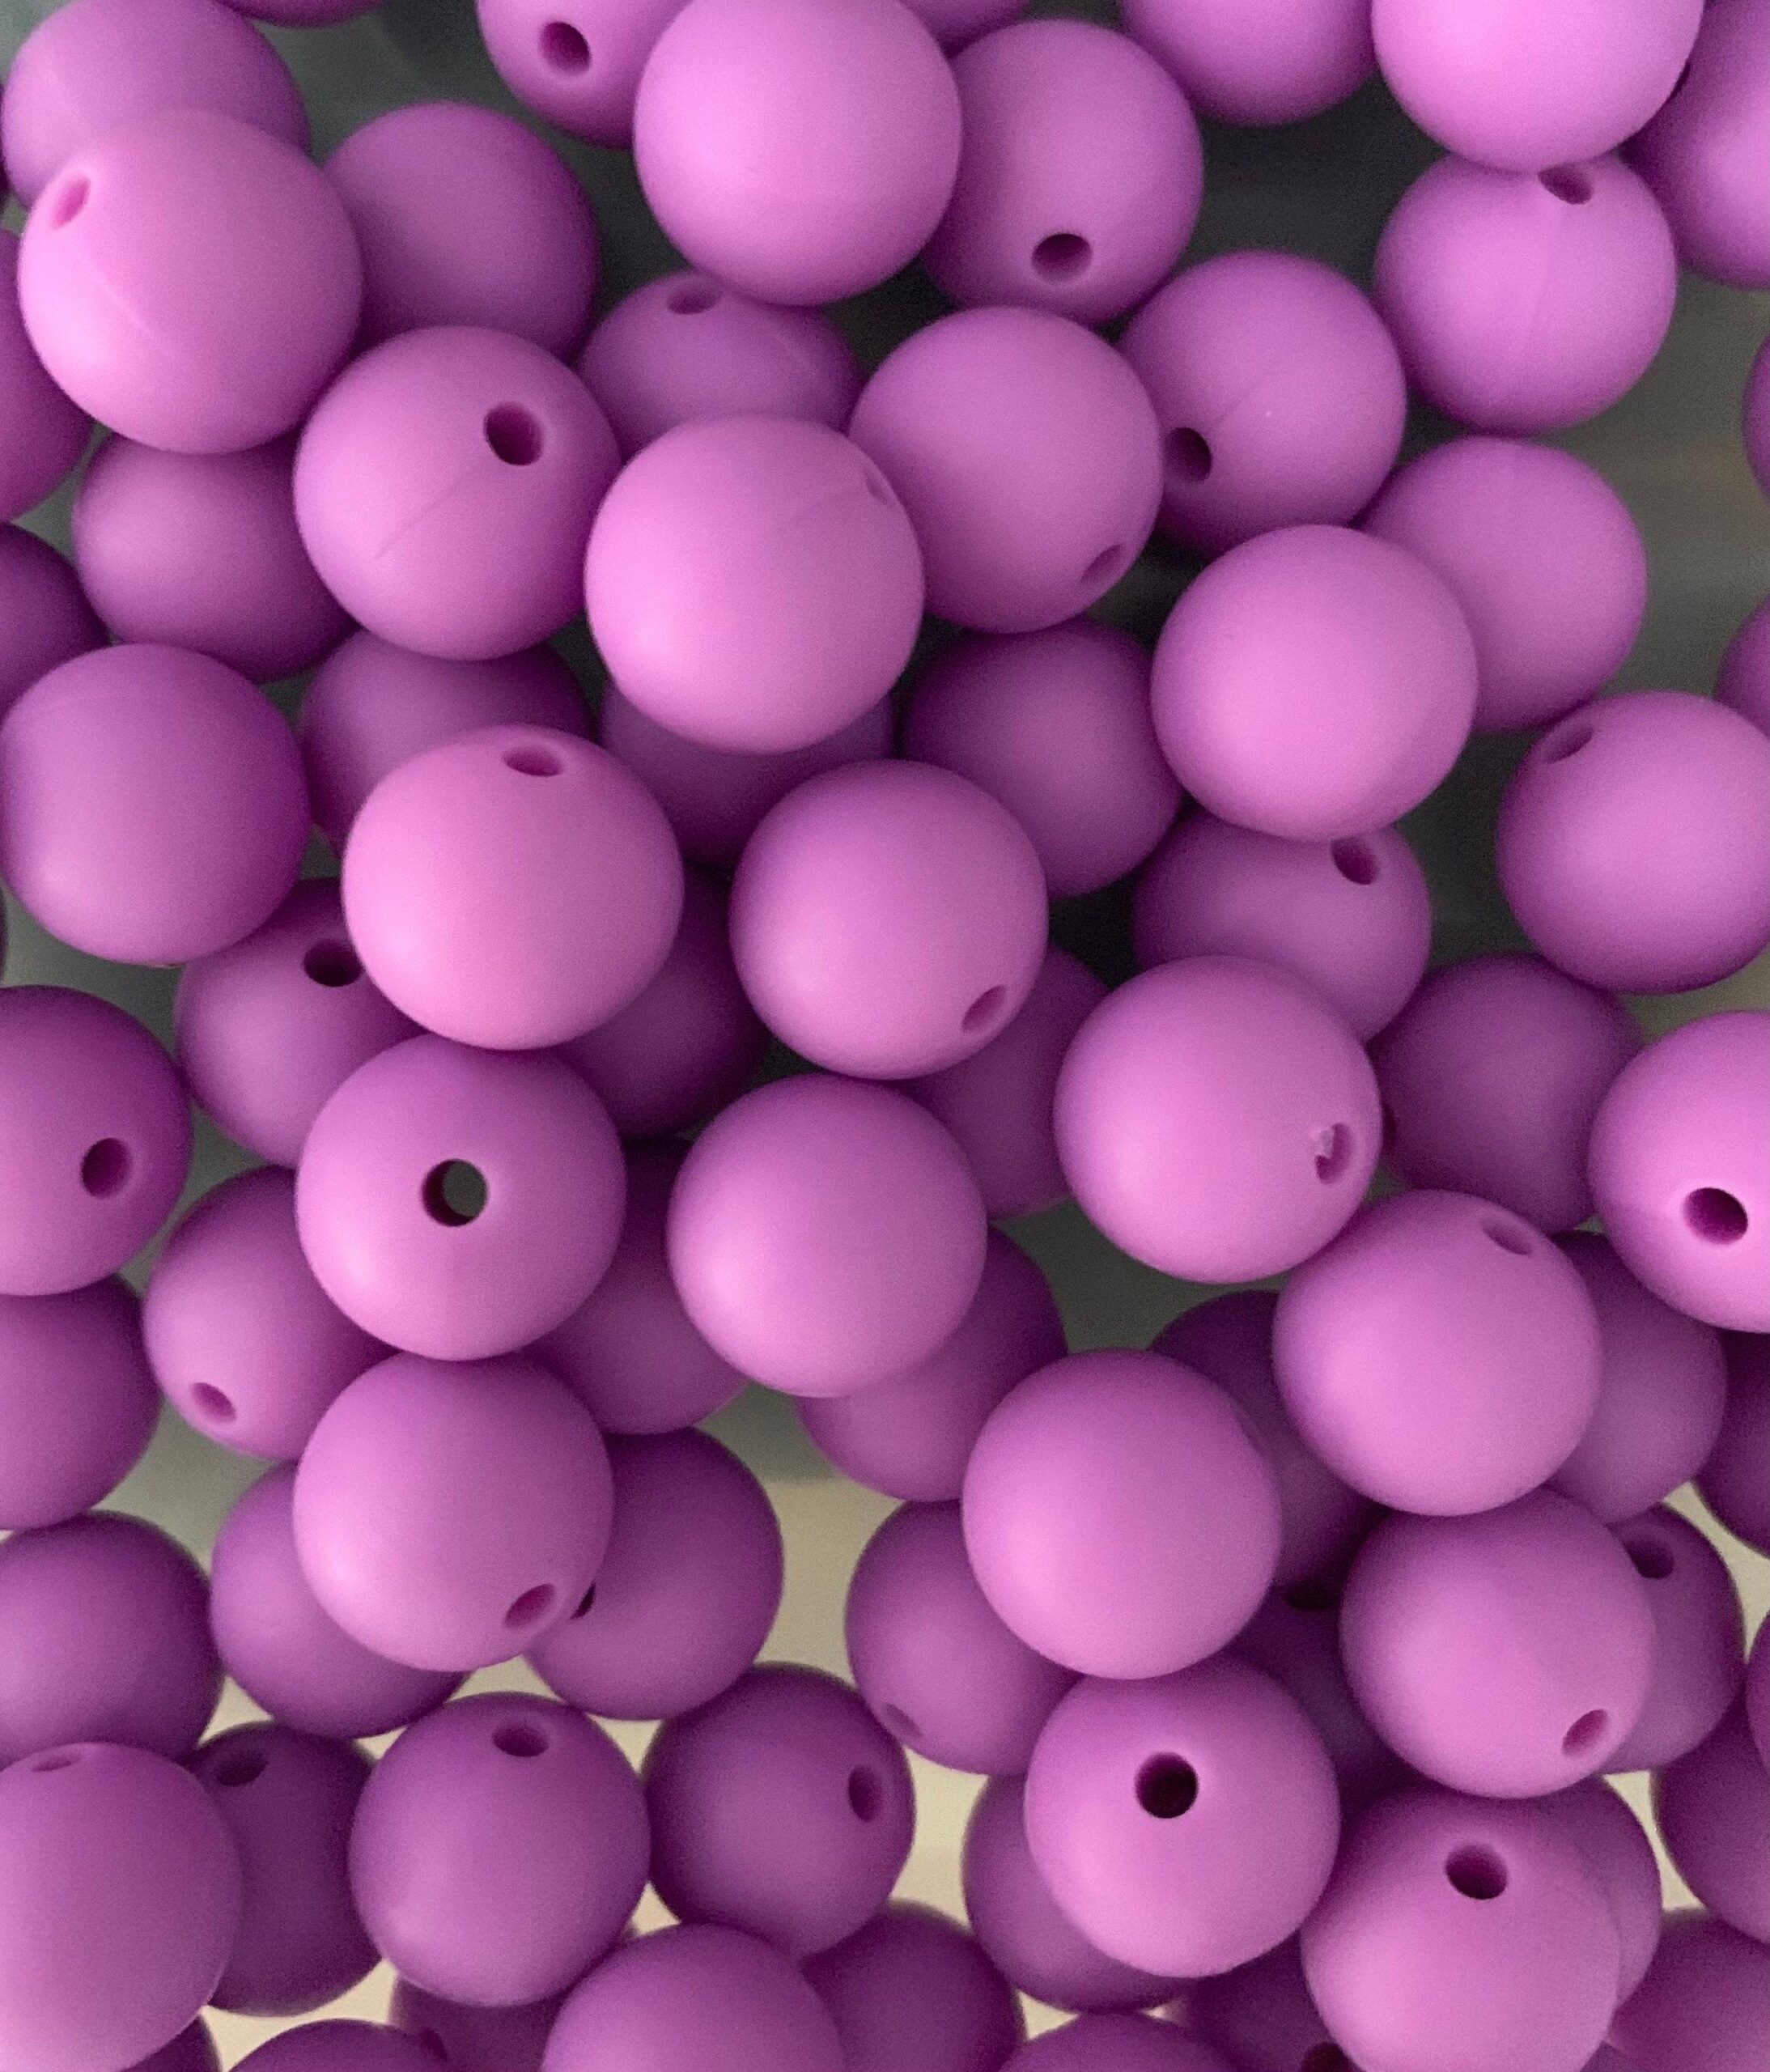 Silicone 12mm Round Lavender Beads